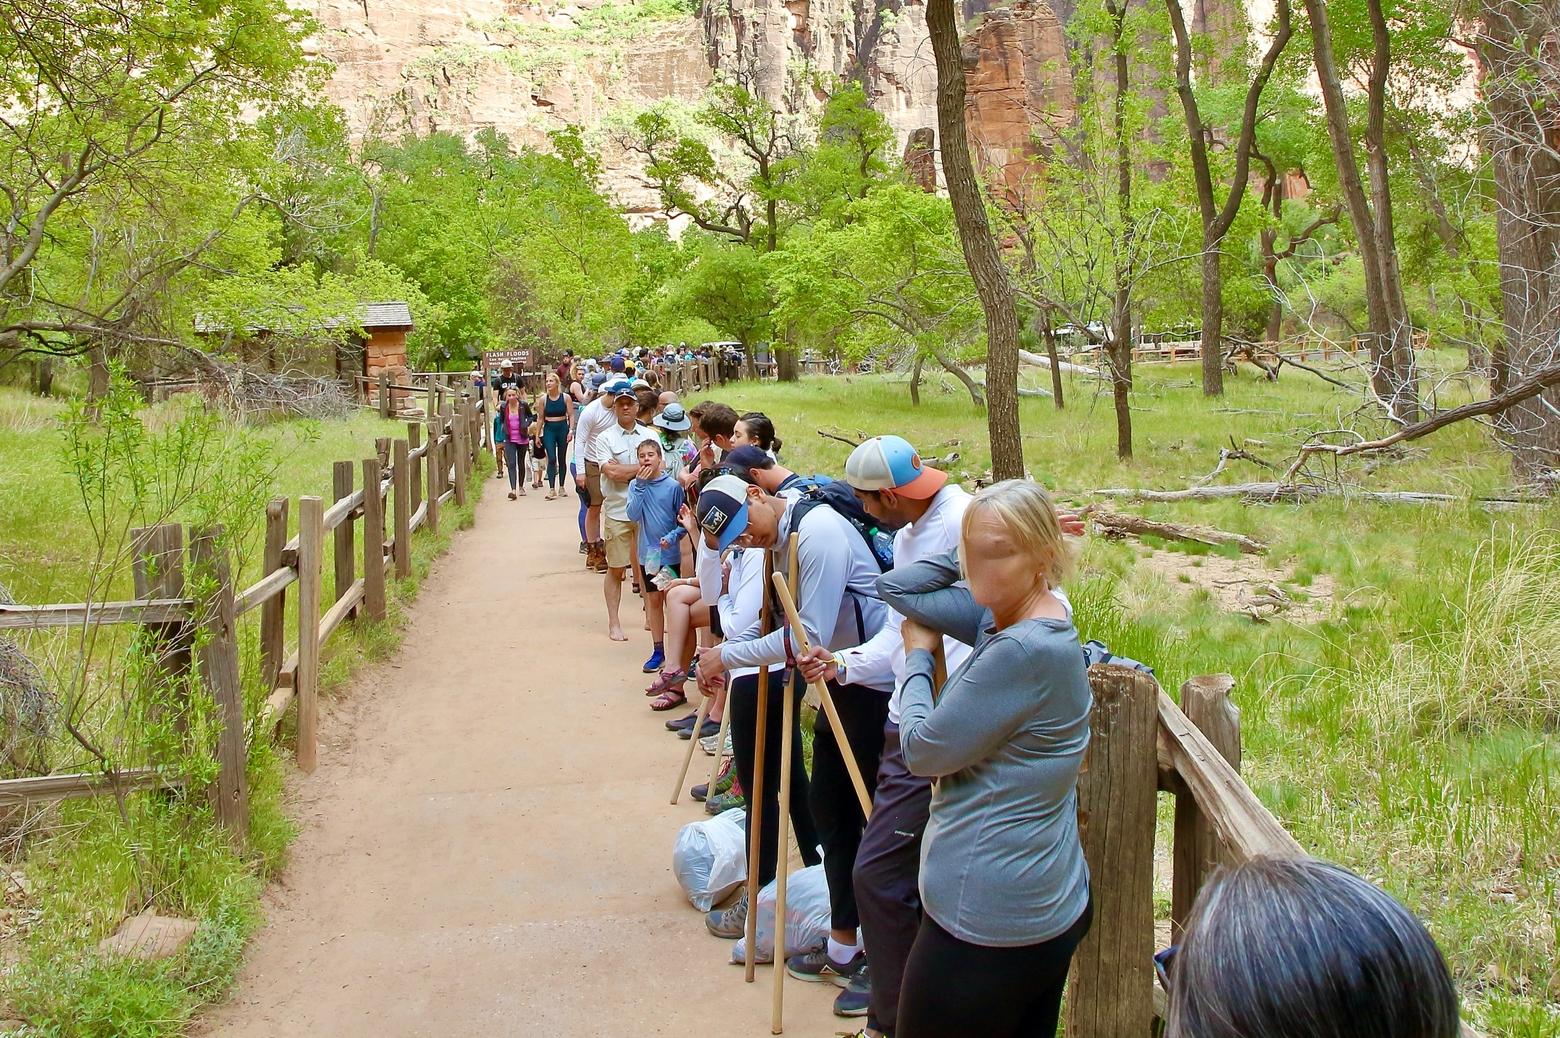 Visitors to Zion National Park wait in line to catch a shuttle bus, one of the tools the park uses to get people out of their cars in order to alleviate traffic congestion. With a lot of federal investment being made in public land infrastructure, will it result in more crowding or less and what will be the consequences for wildlife?  Here's also a major difference between how hunters/anglers and outdoor recreationists approach the backcountry. Hunters and anglers do not like having a lot of people in the areas where they hunt and fish; non-hunting outdoor recreationists, meanwhile, seem to have a much higher tolerance for playing amid crowds of people.  Photo courtesy Shutterstock ID 1973723012